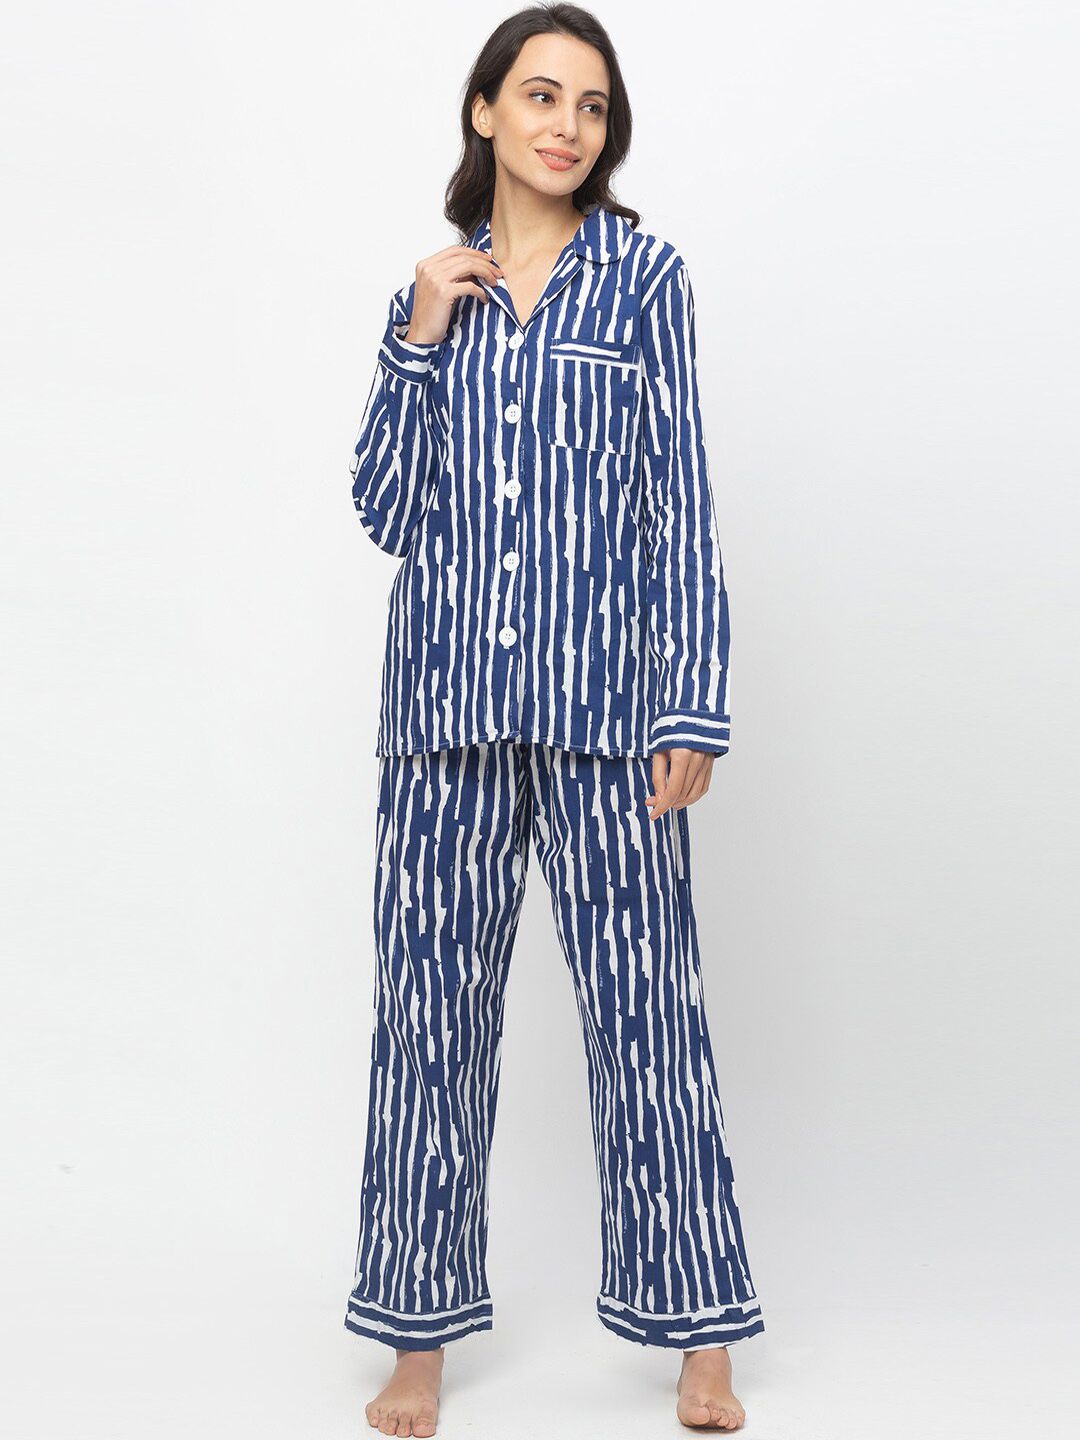 Nick&Jess Women Blue & White Striped Night Suit Price in India